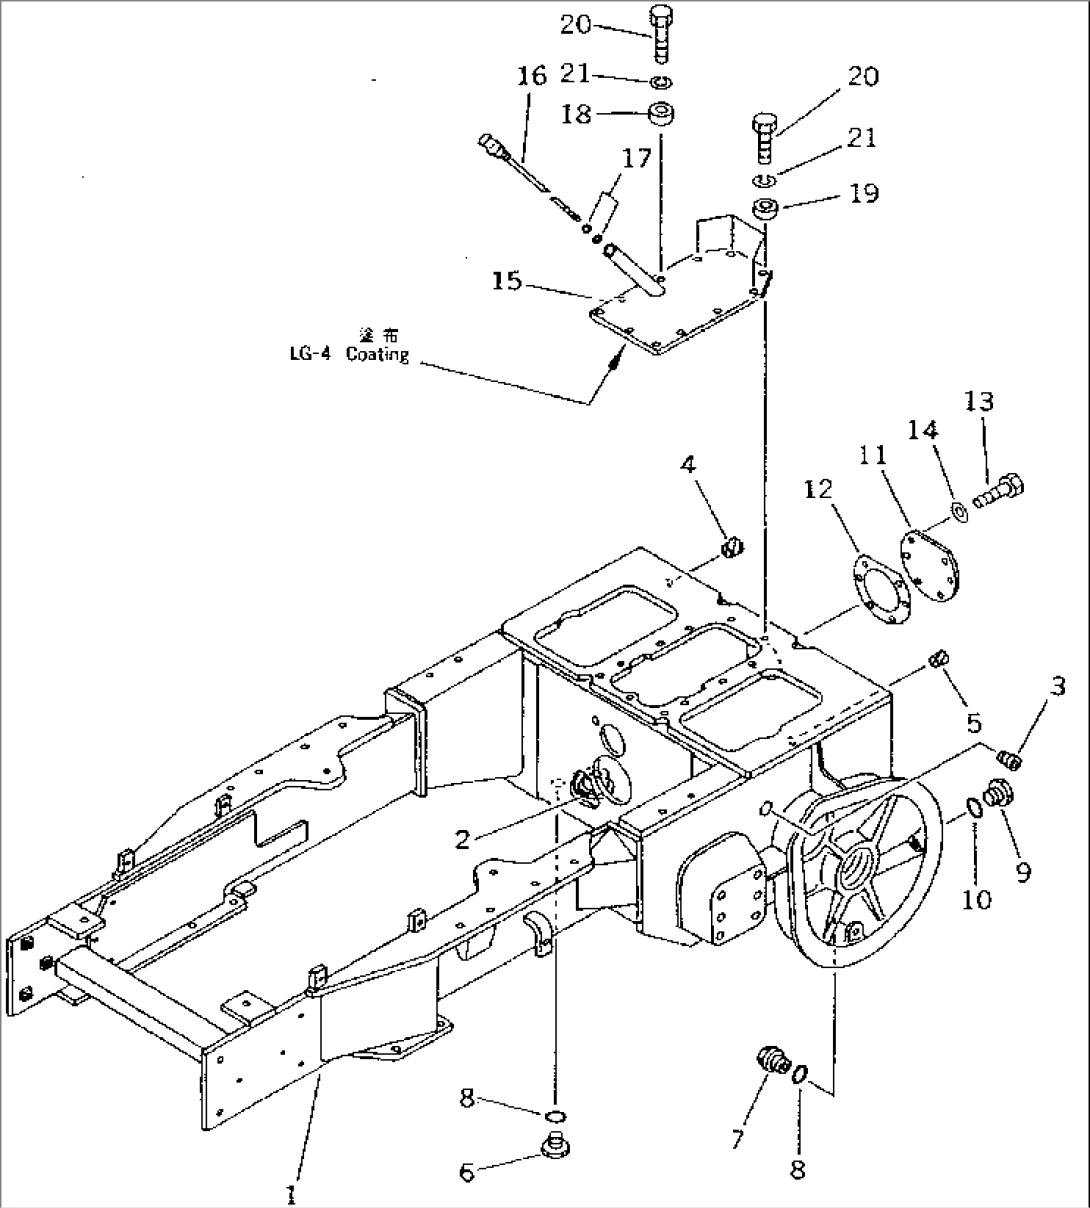 STEERING CASE AND MAIN FRAME (FOR ANGLE DOZER) (FOR MONO LEVER STEERING)